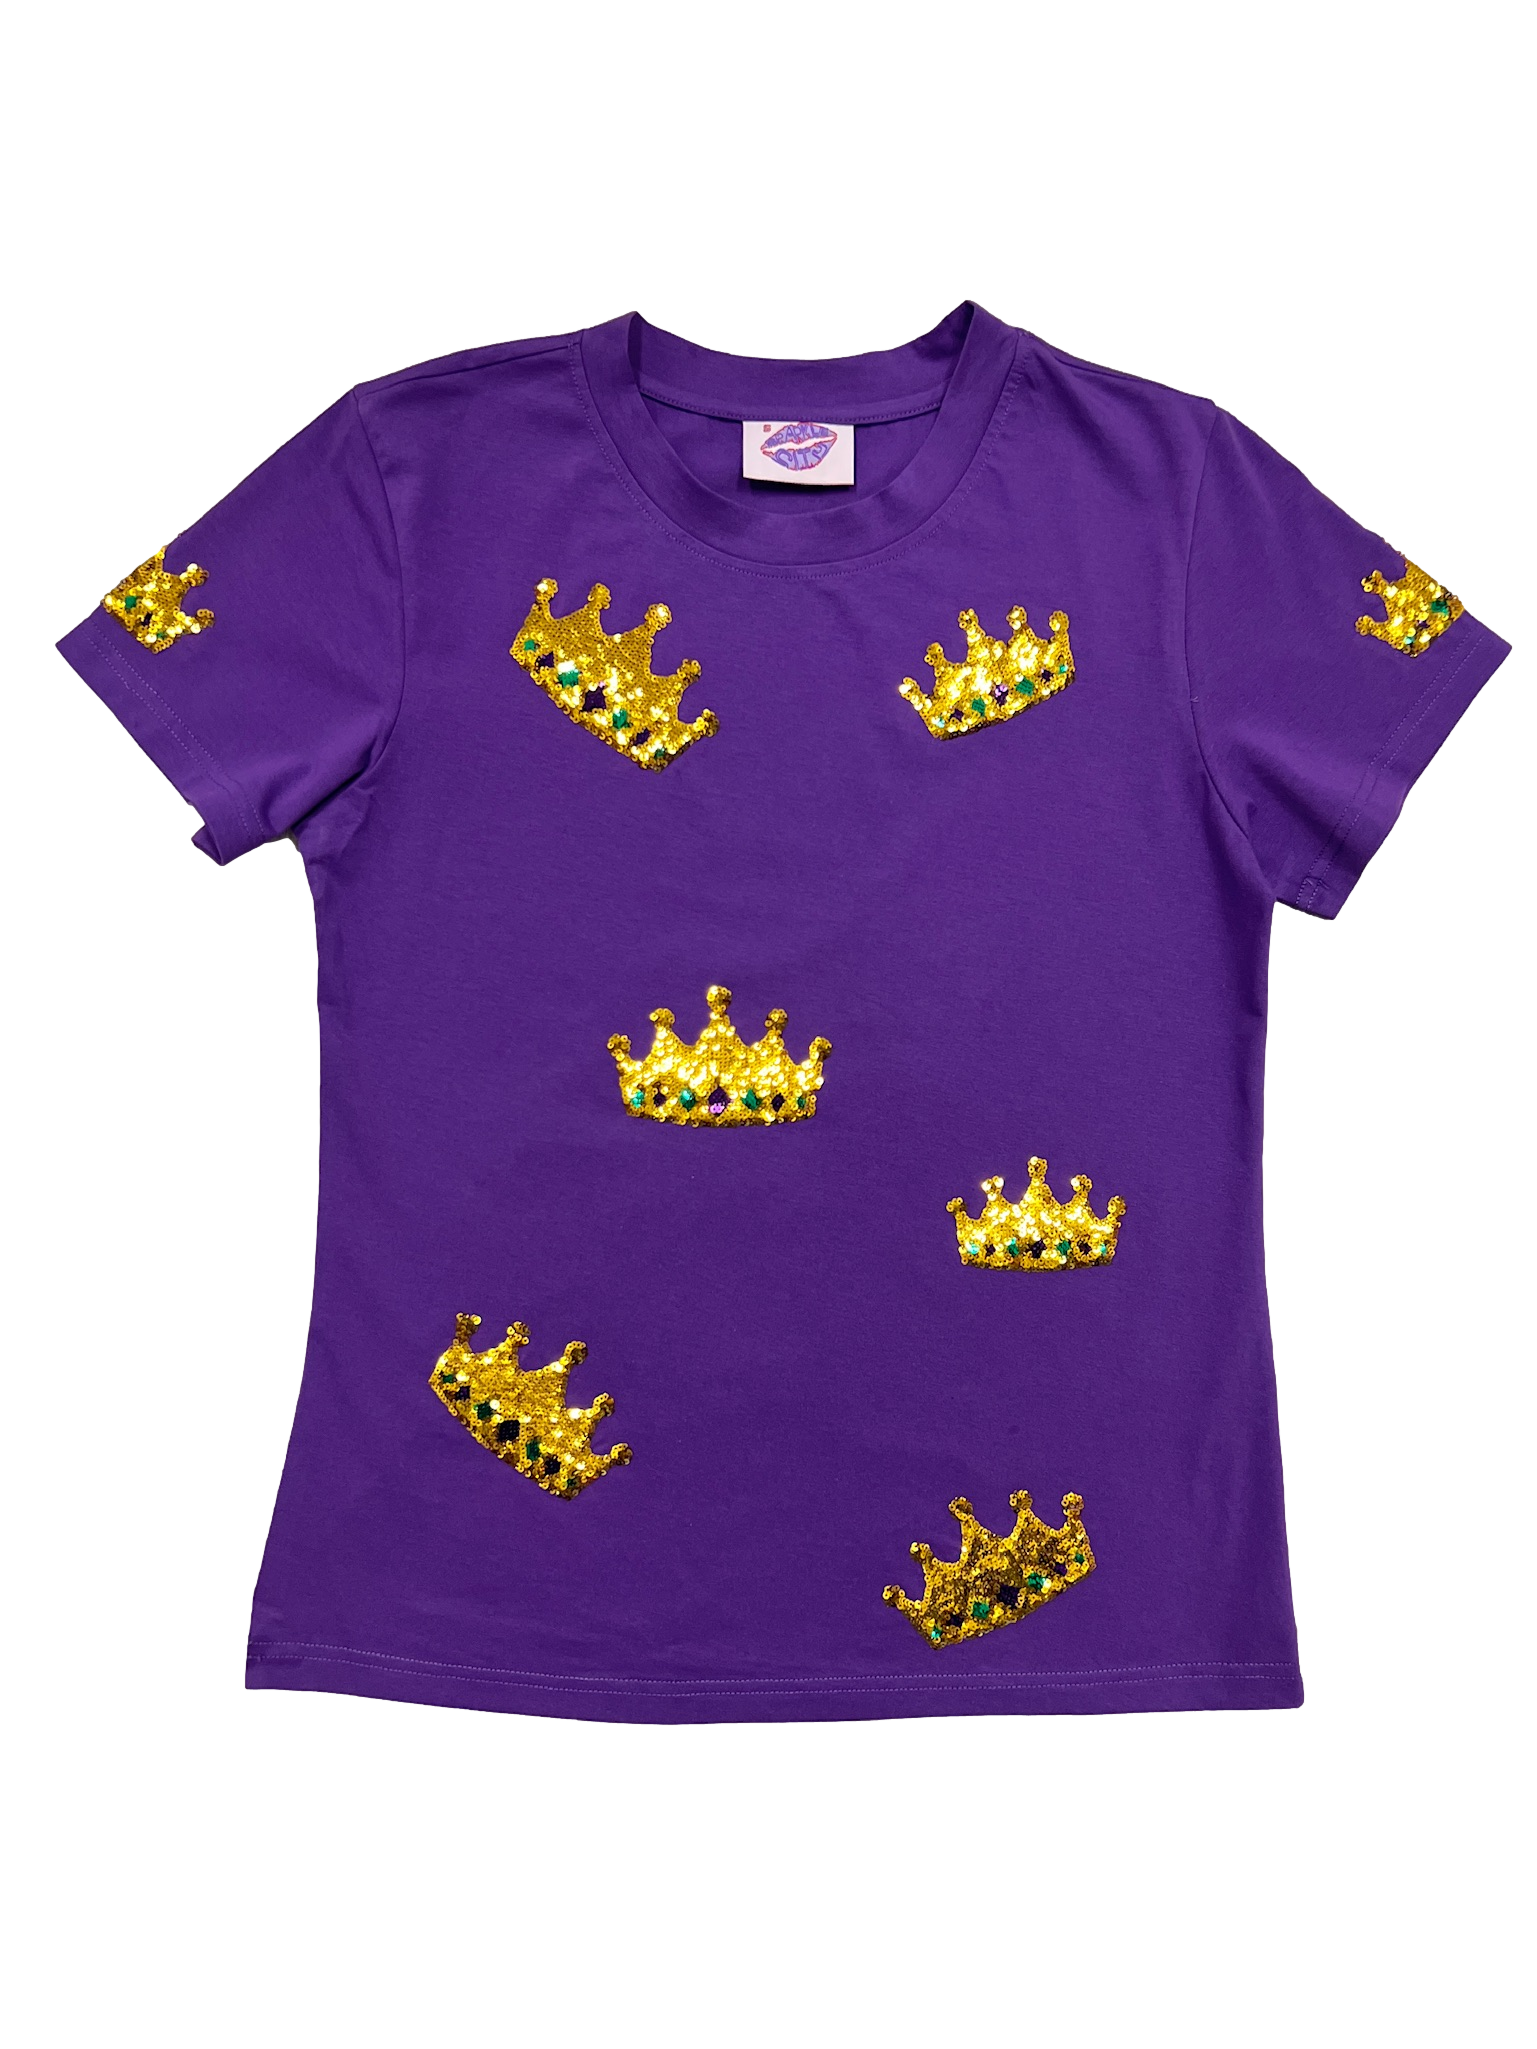 Crown Takeover Tee